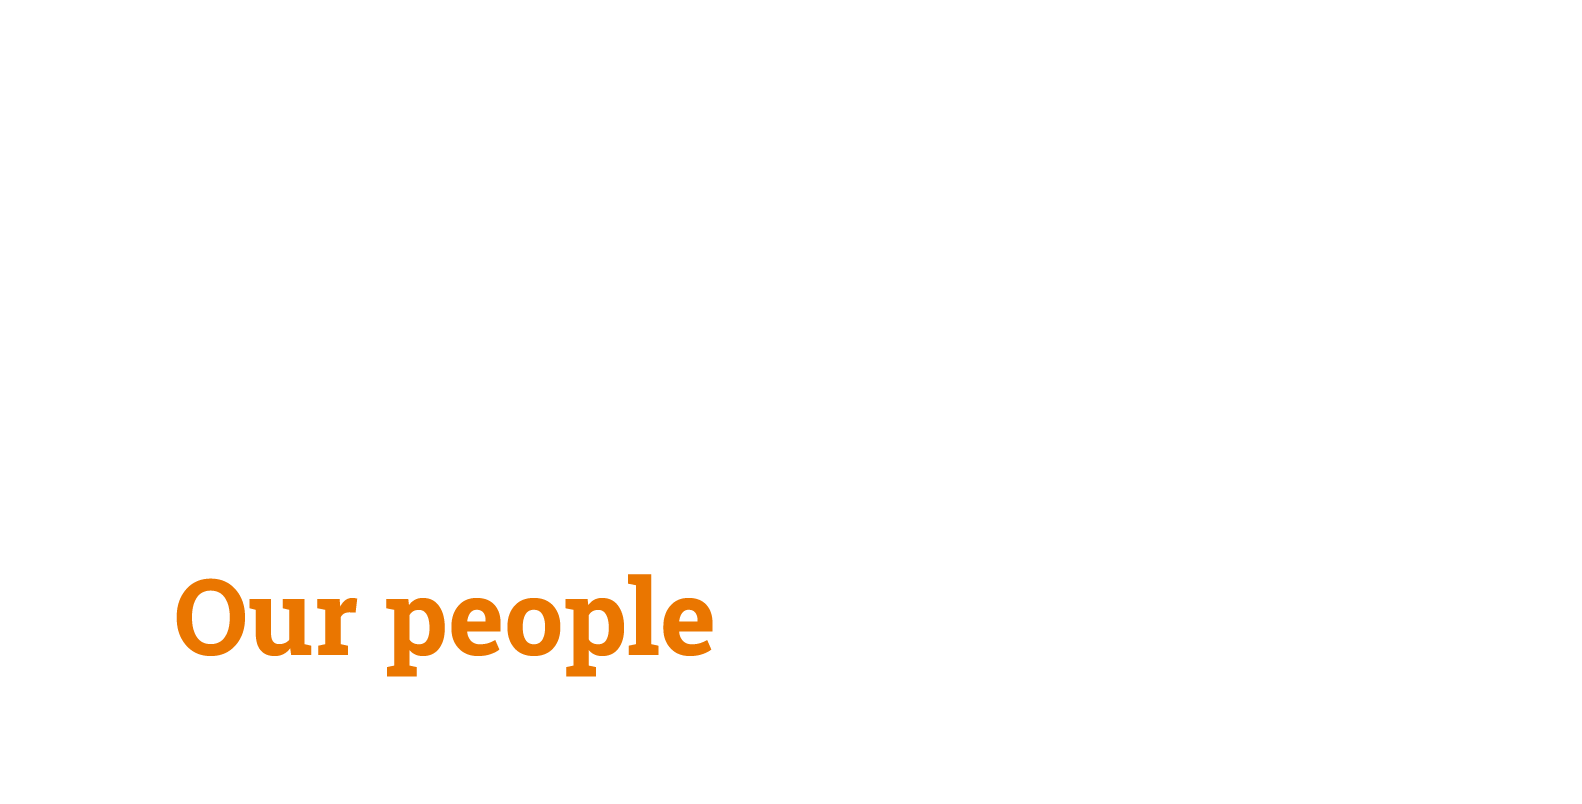 Banner evolution - Our people